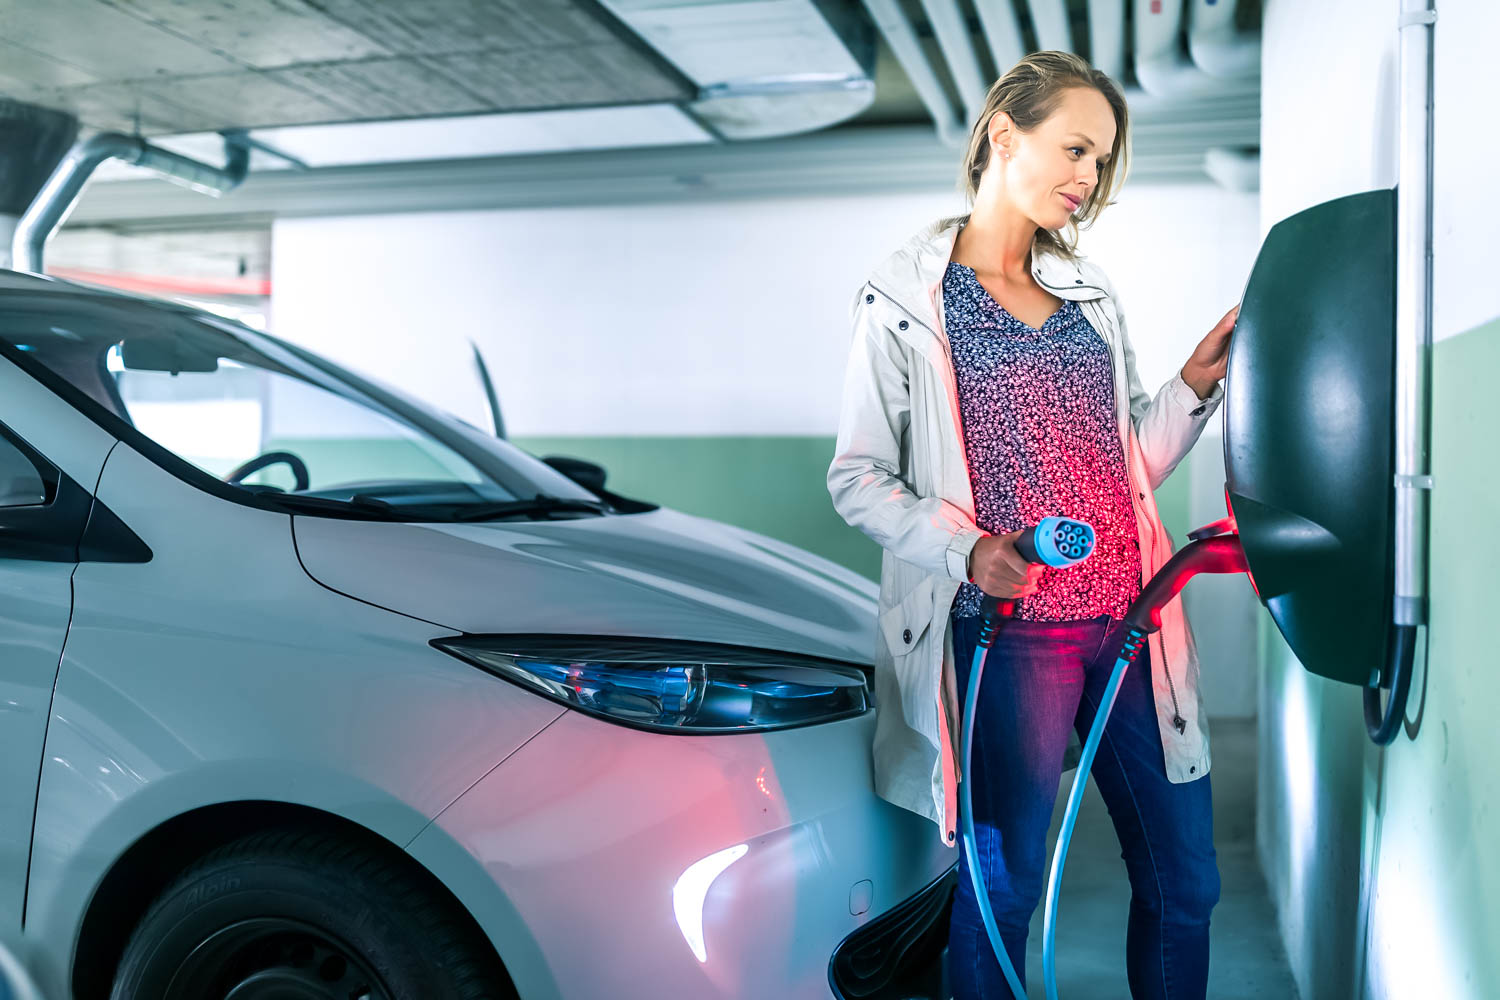 Electric Vehicle Charging: Should You Do it Overnight or at Work? Debunking EV Charging Myths and Establishing Good Habits